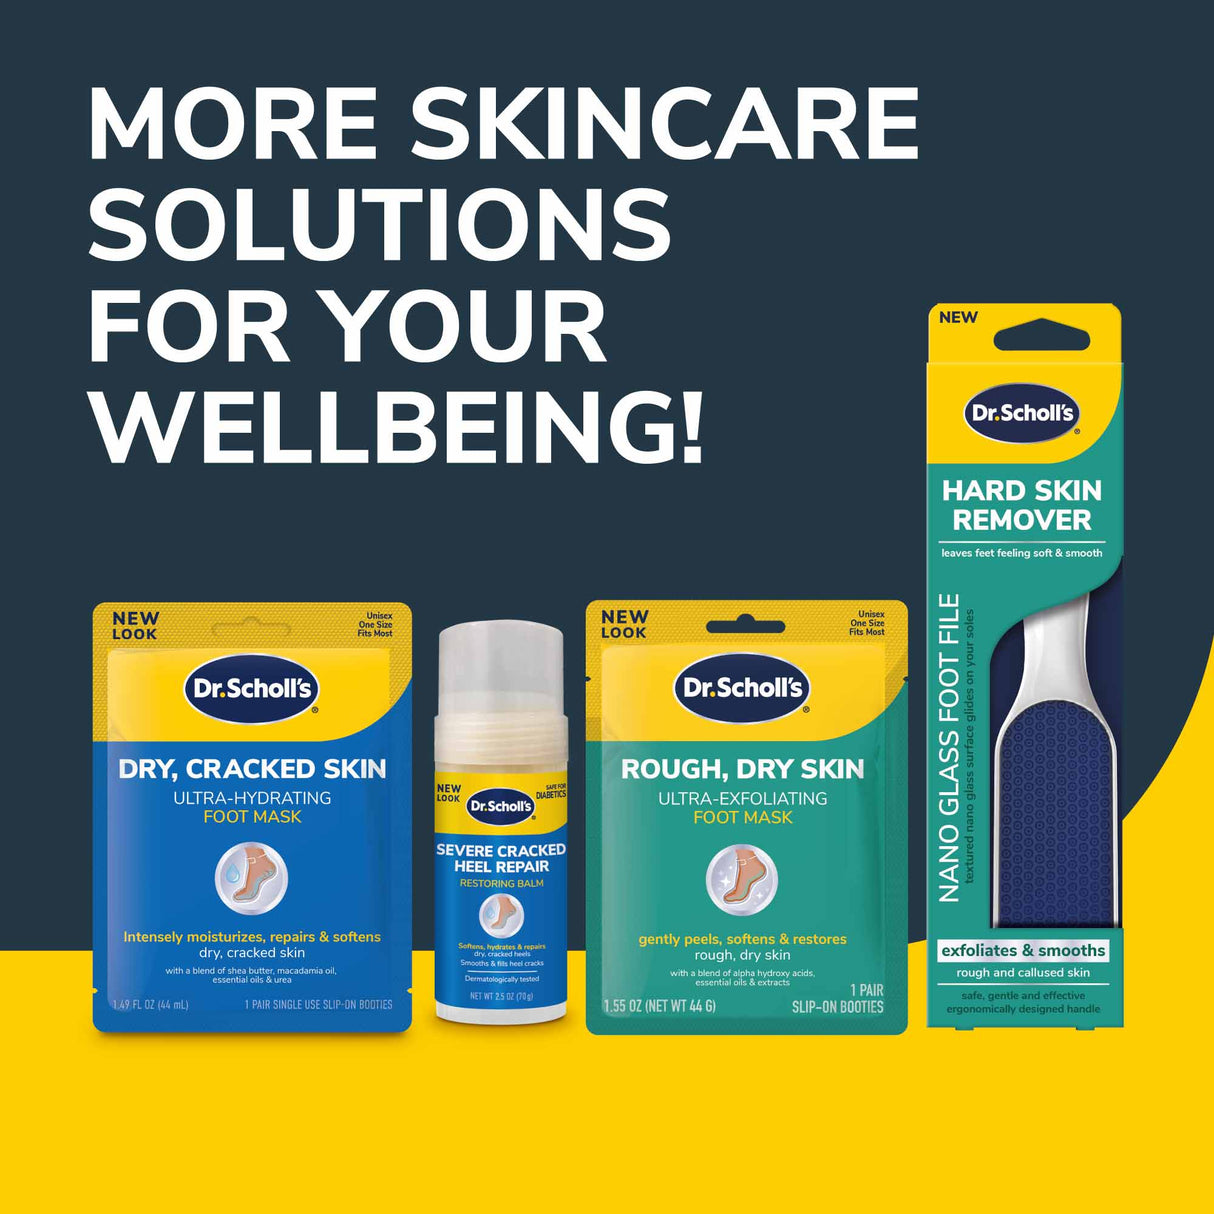 image of more skincare solutions for your wellbeing